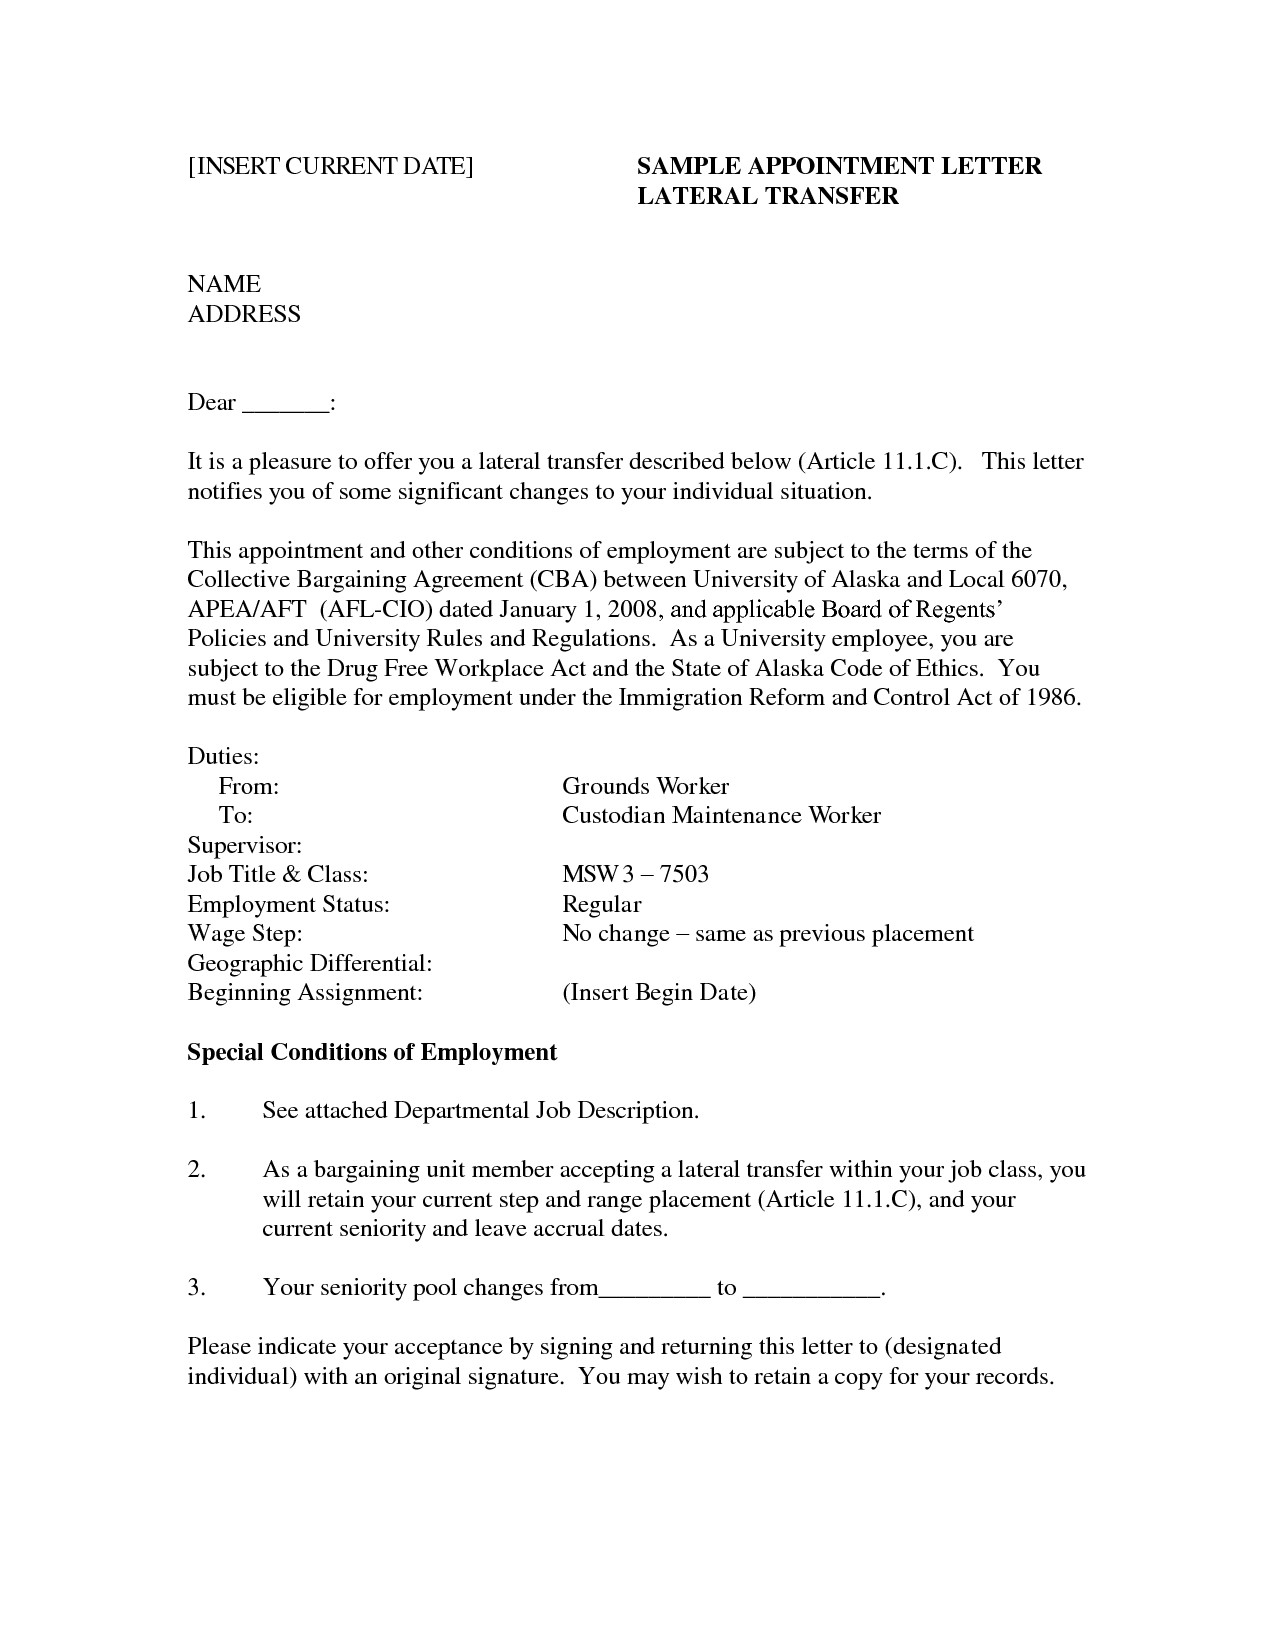 Cover Letter Template for It Job - Beautiful Resume and Cover Letter Templates Your Template